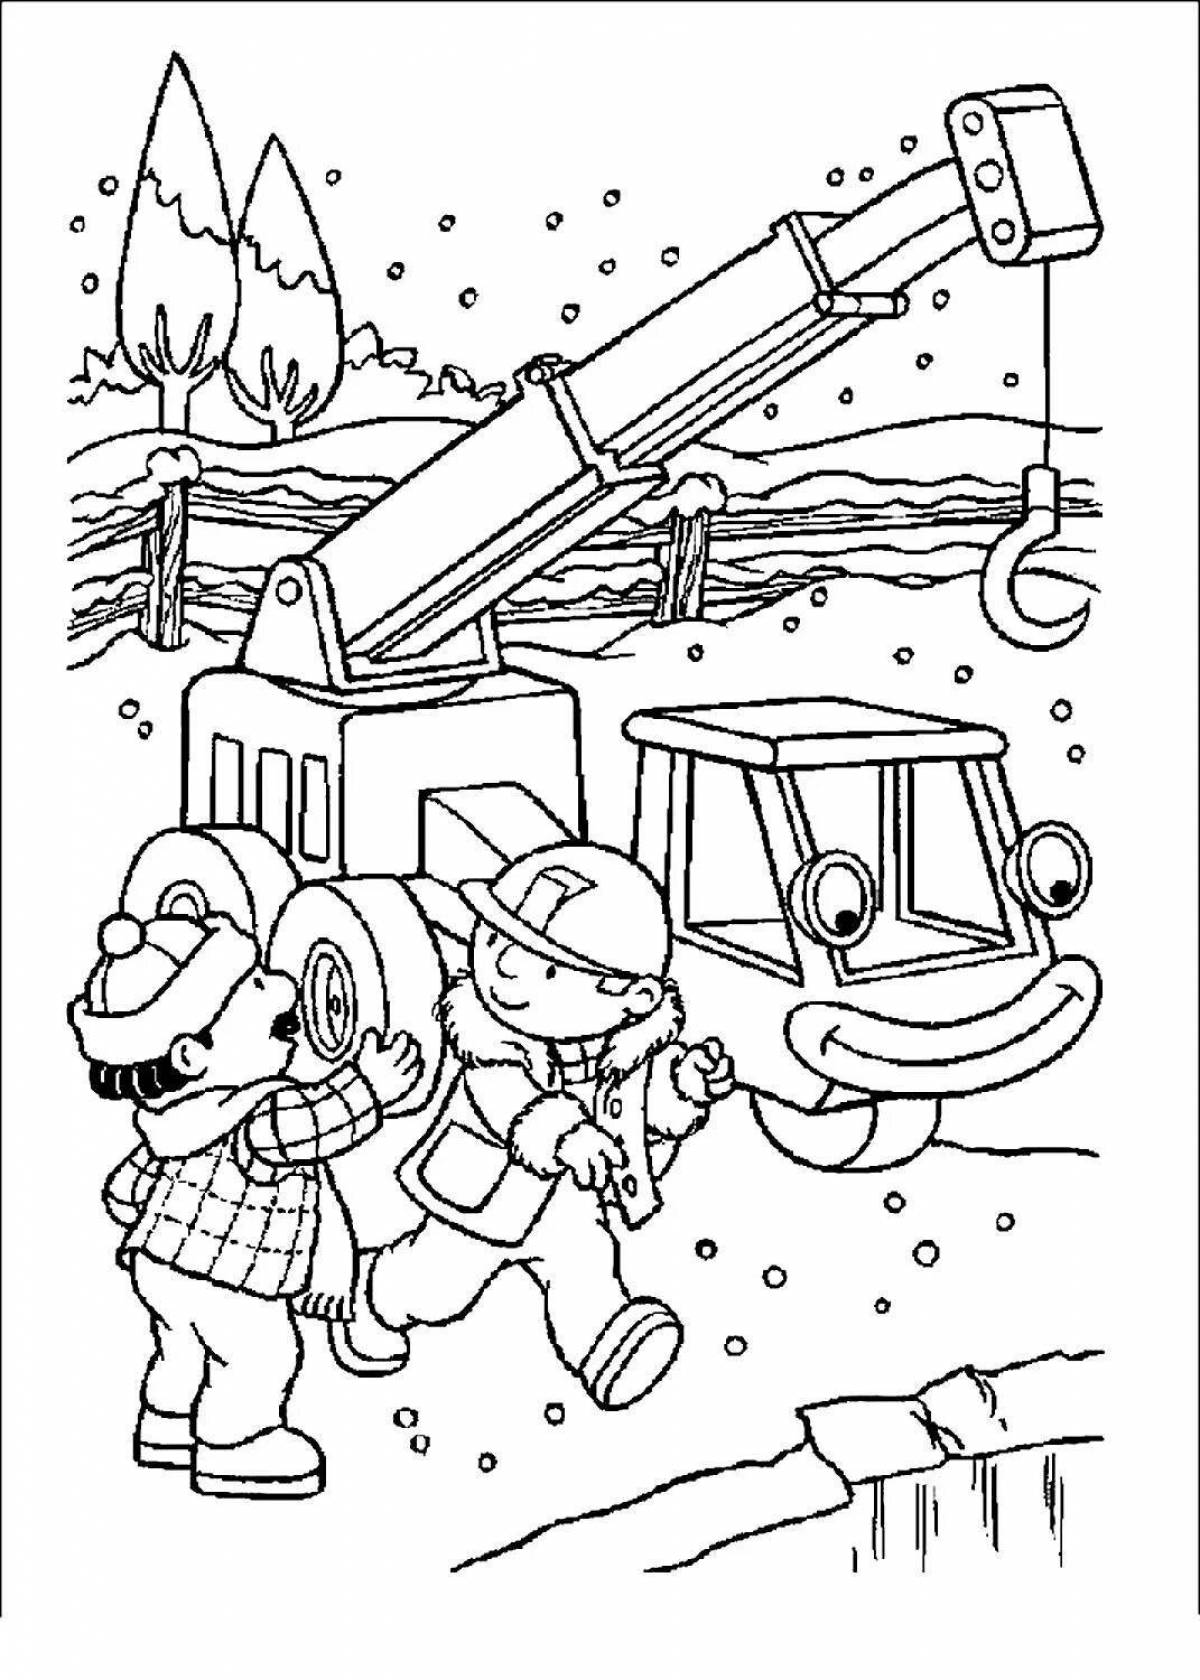 Fairytale building coloring pages for kids